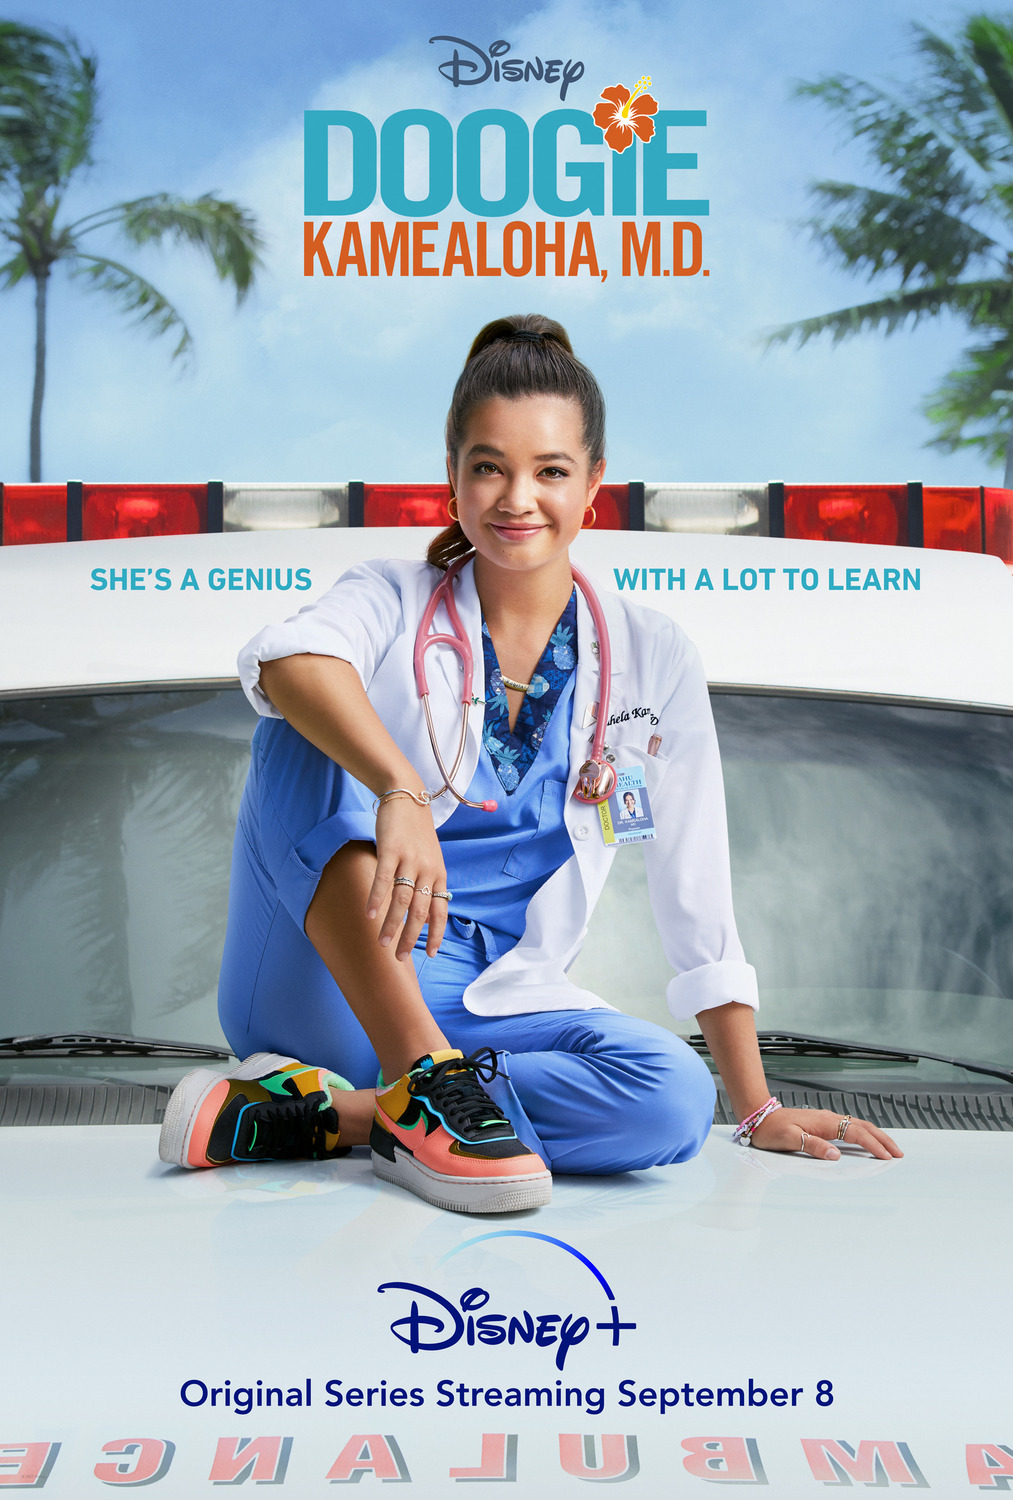 Extra Large Movie Poster Image for Doogie Kamealoha, M.D. 